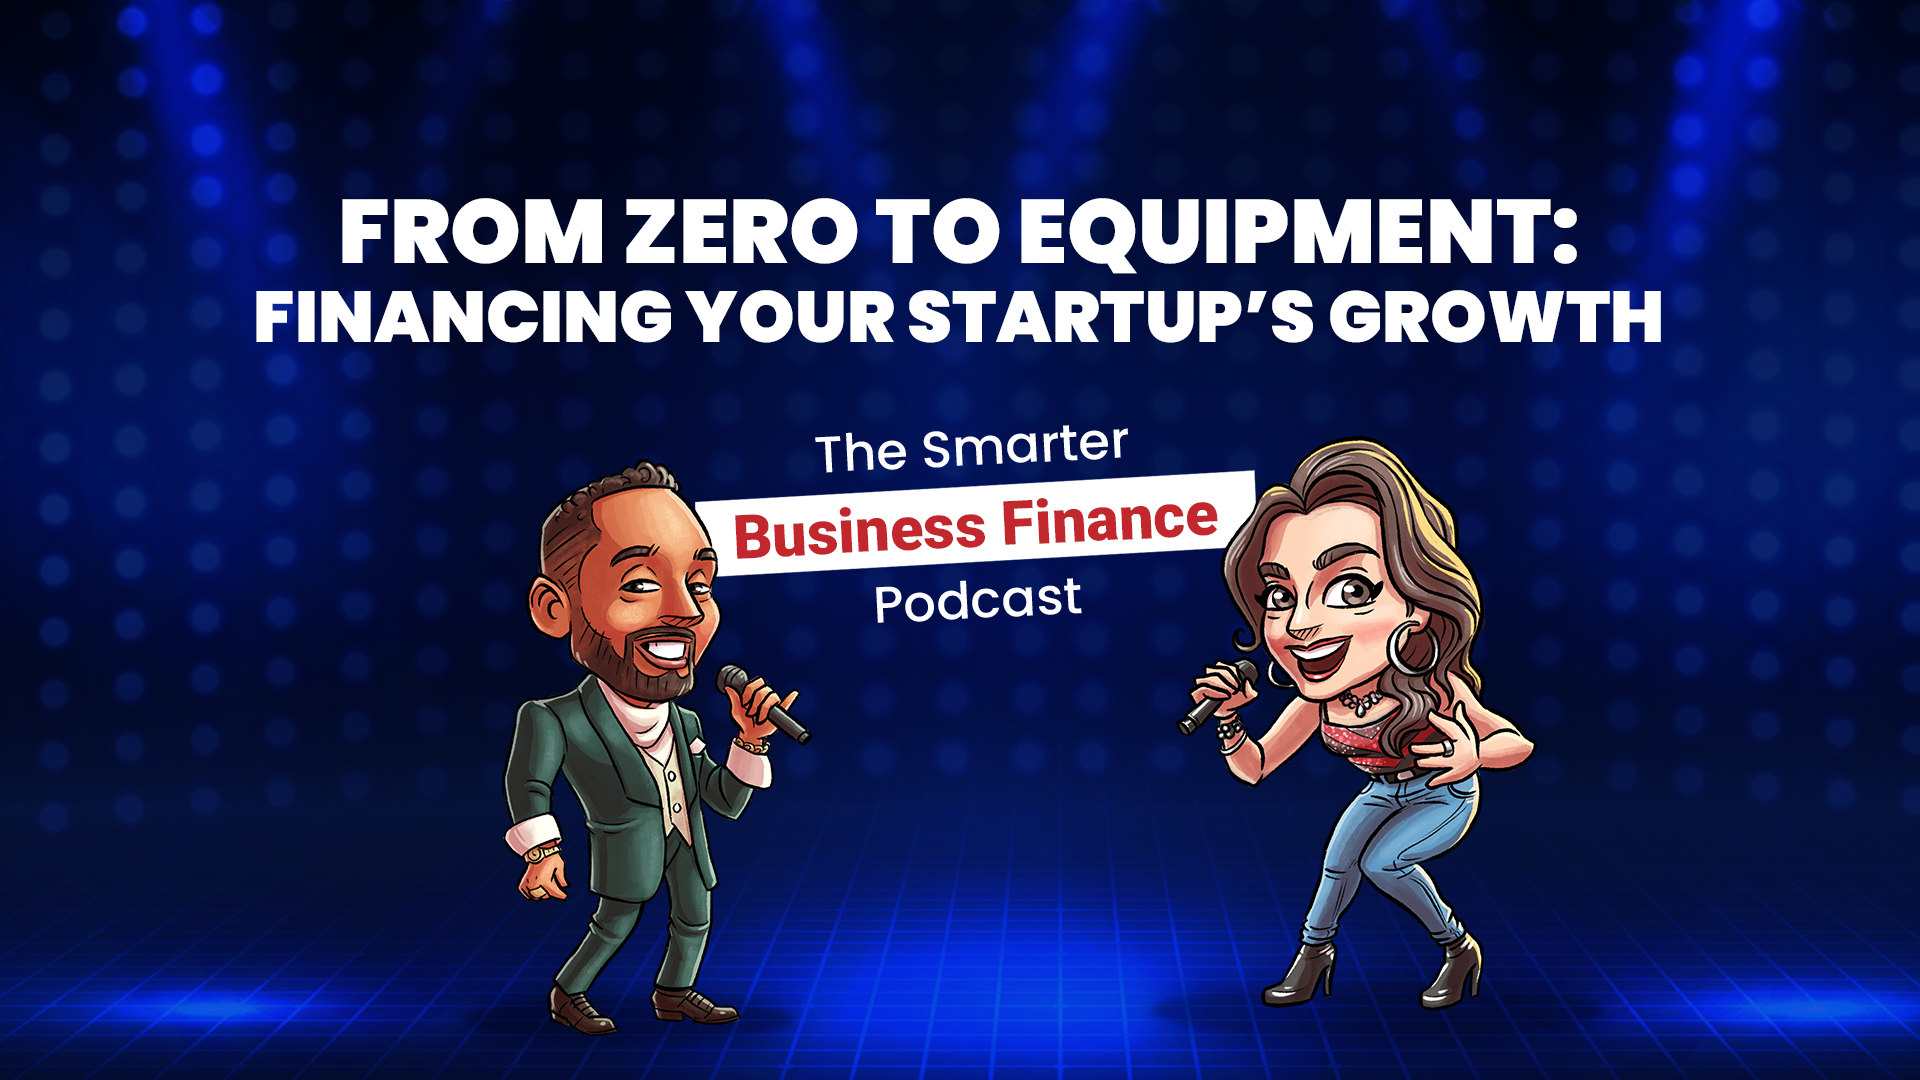 From Zero to Equipment: Financing Your Startup's Growth